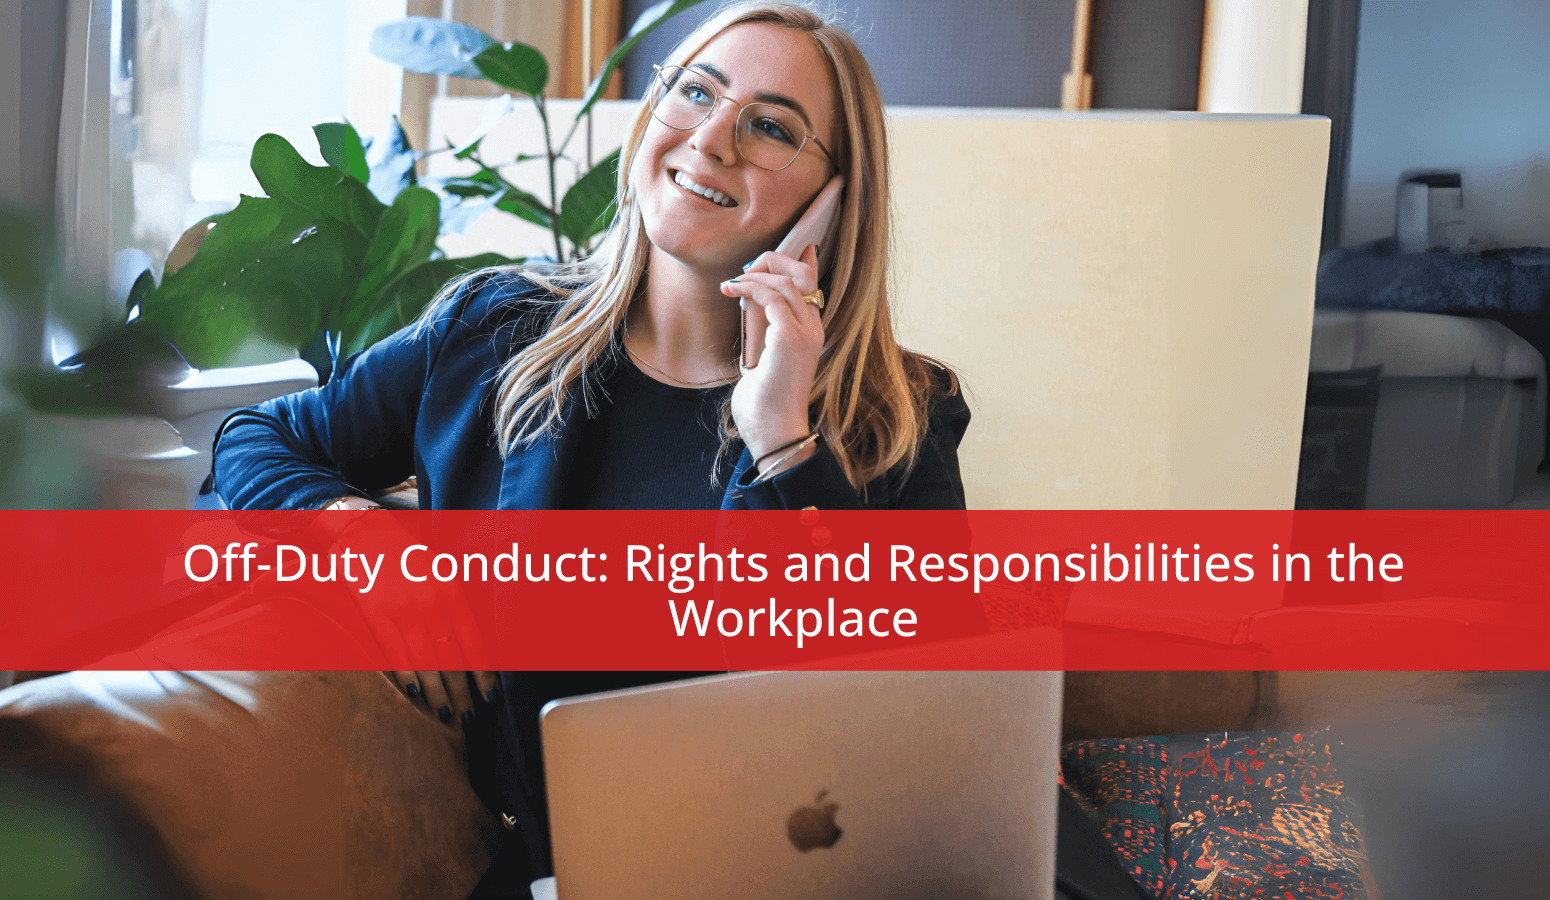 Featured image for “Off-Duty Conduct: Rights and Responsibilities in the Workplace”